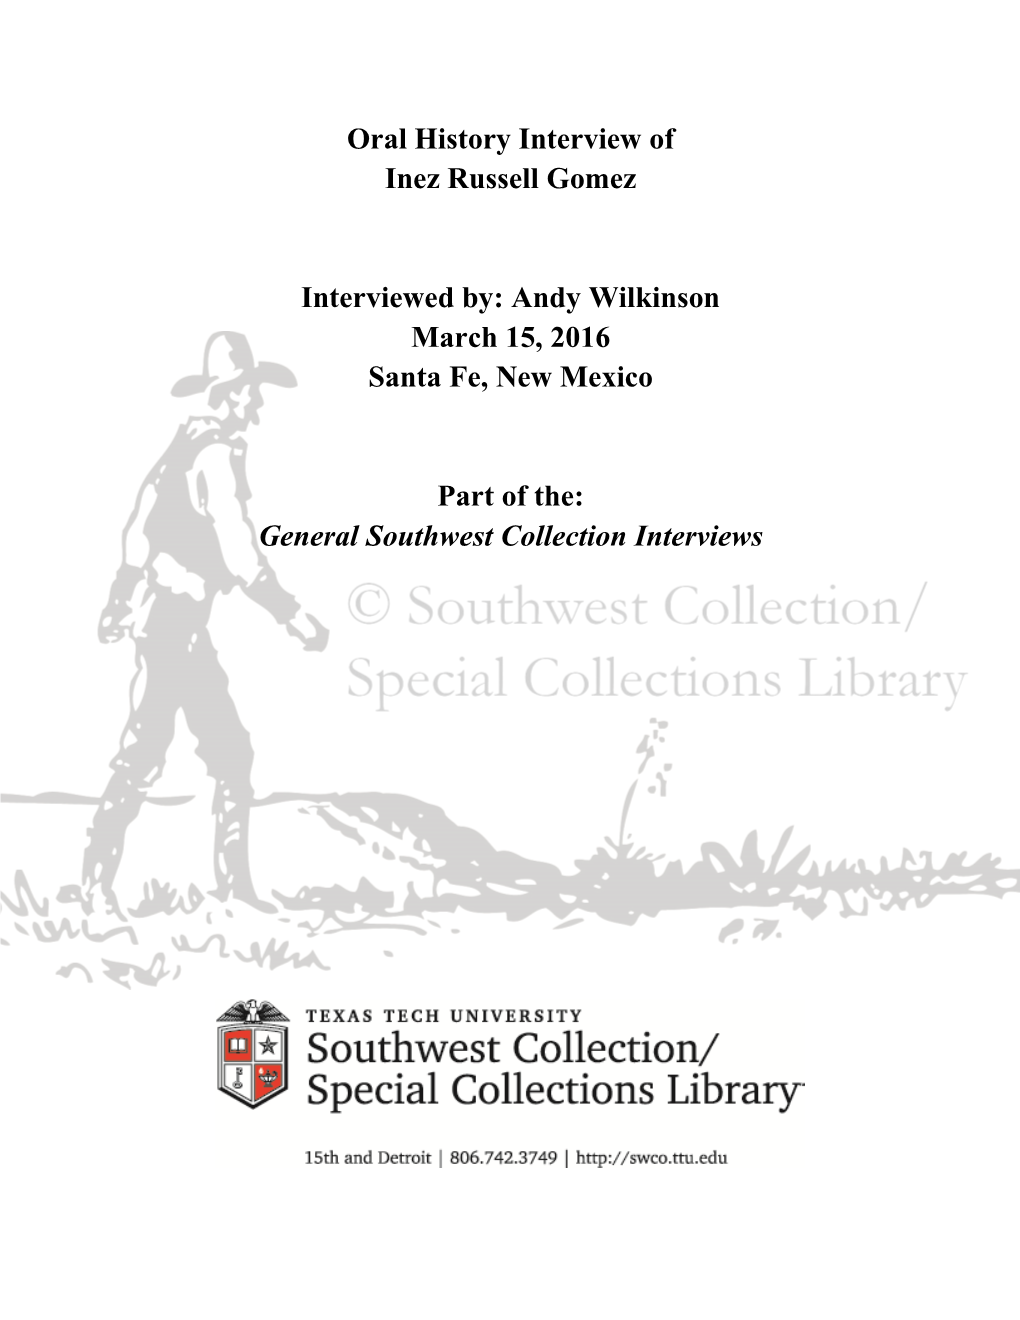 Texas Tech University's Southwest Collection/Special Collections